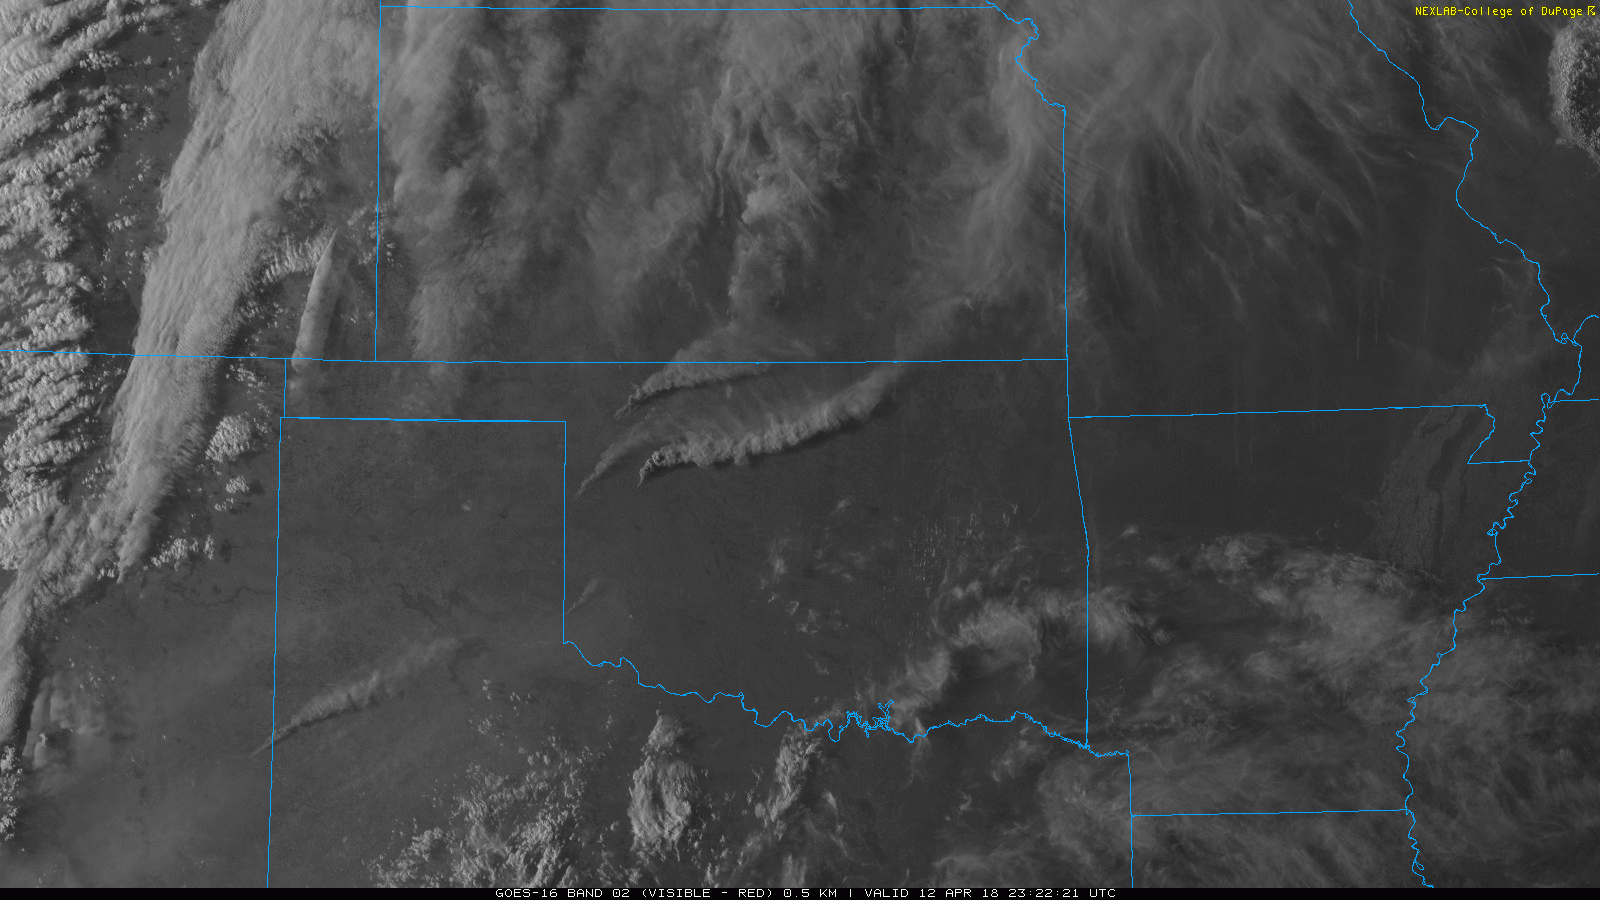 5-minute visible satellite animation valid from 6:27 pm to 7:07 pm on 12 April 2018. The imagery is courtesy of the College of DuPage.